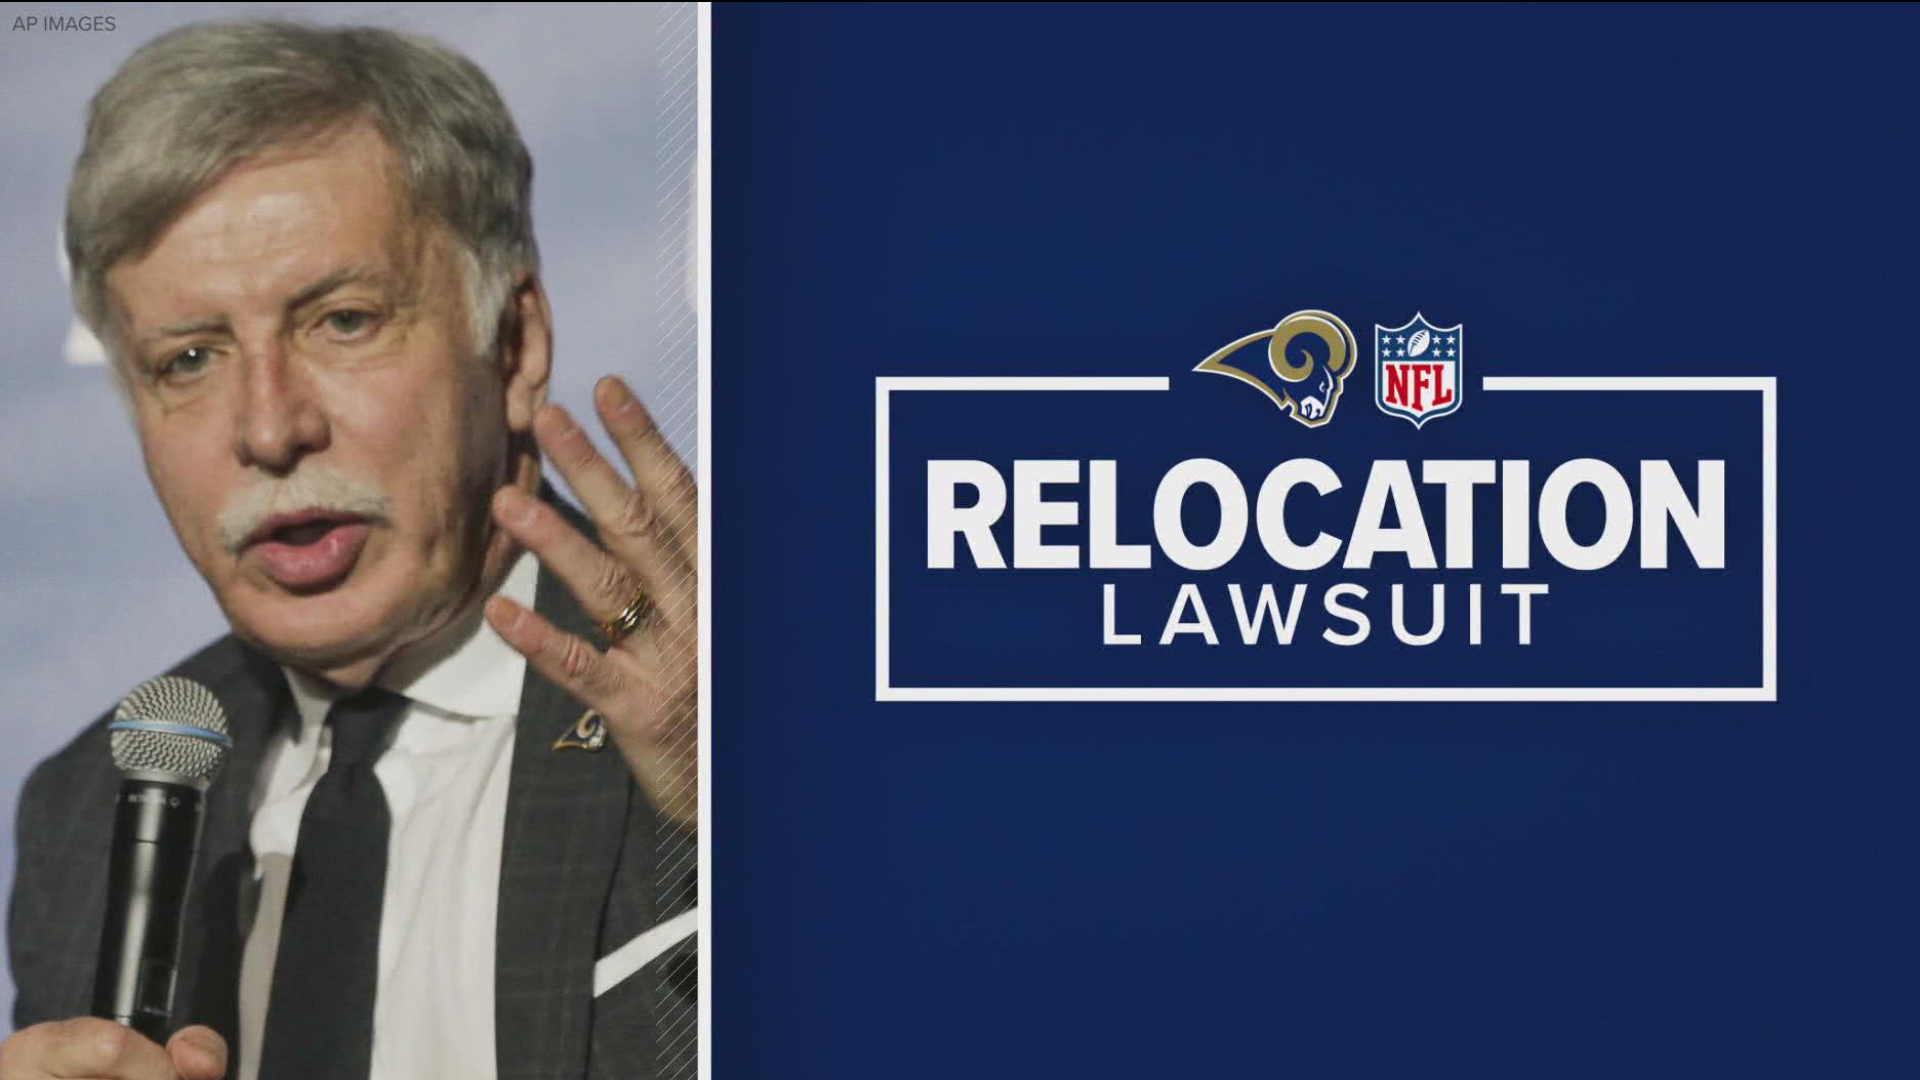 5 On Your Side's Frank Cusumano reports the St. Louis team and the NFL and Rams owner Stan Kroenke agreed to settle the lawsuit. The settlement is $790 million.